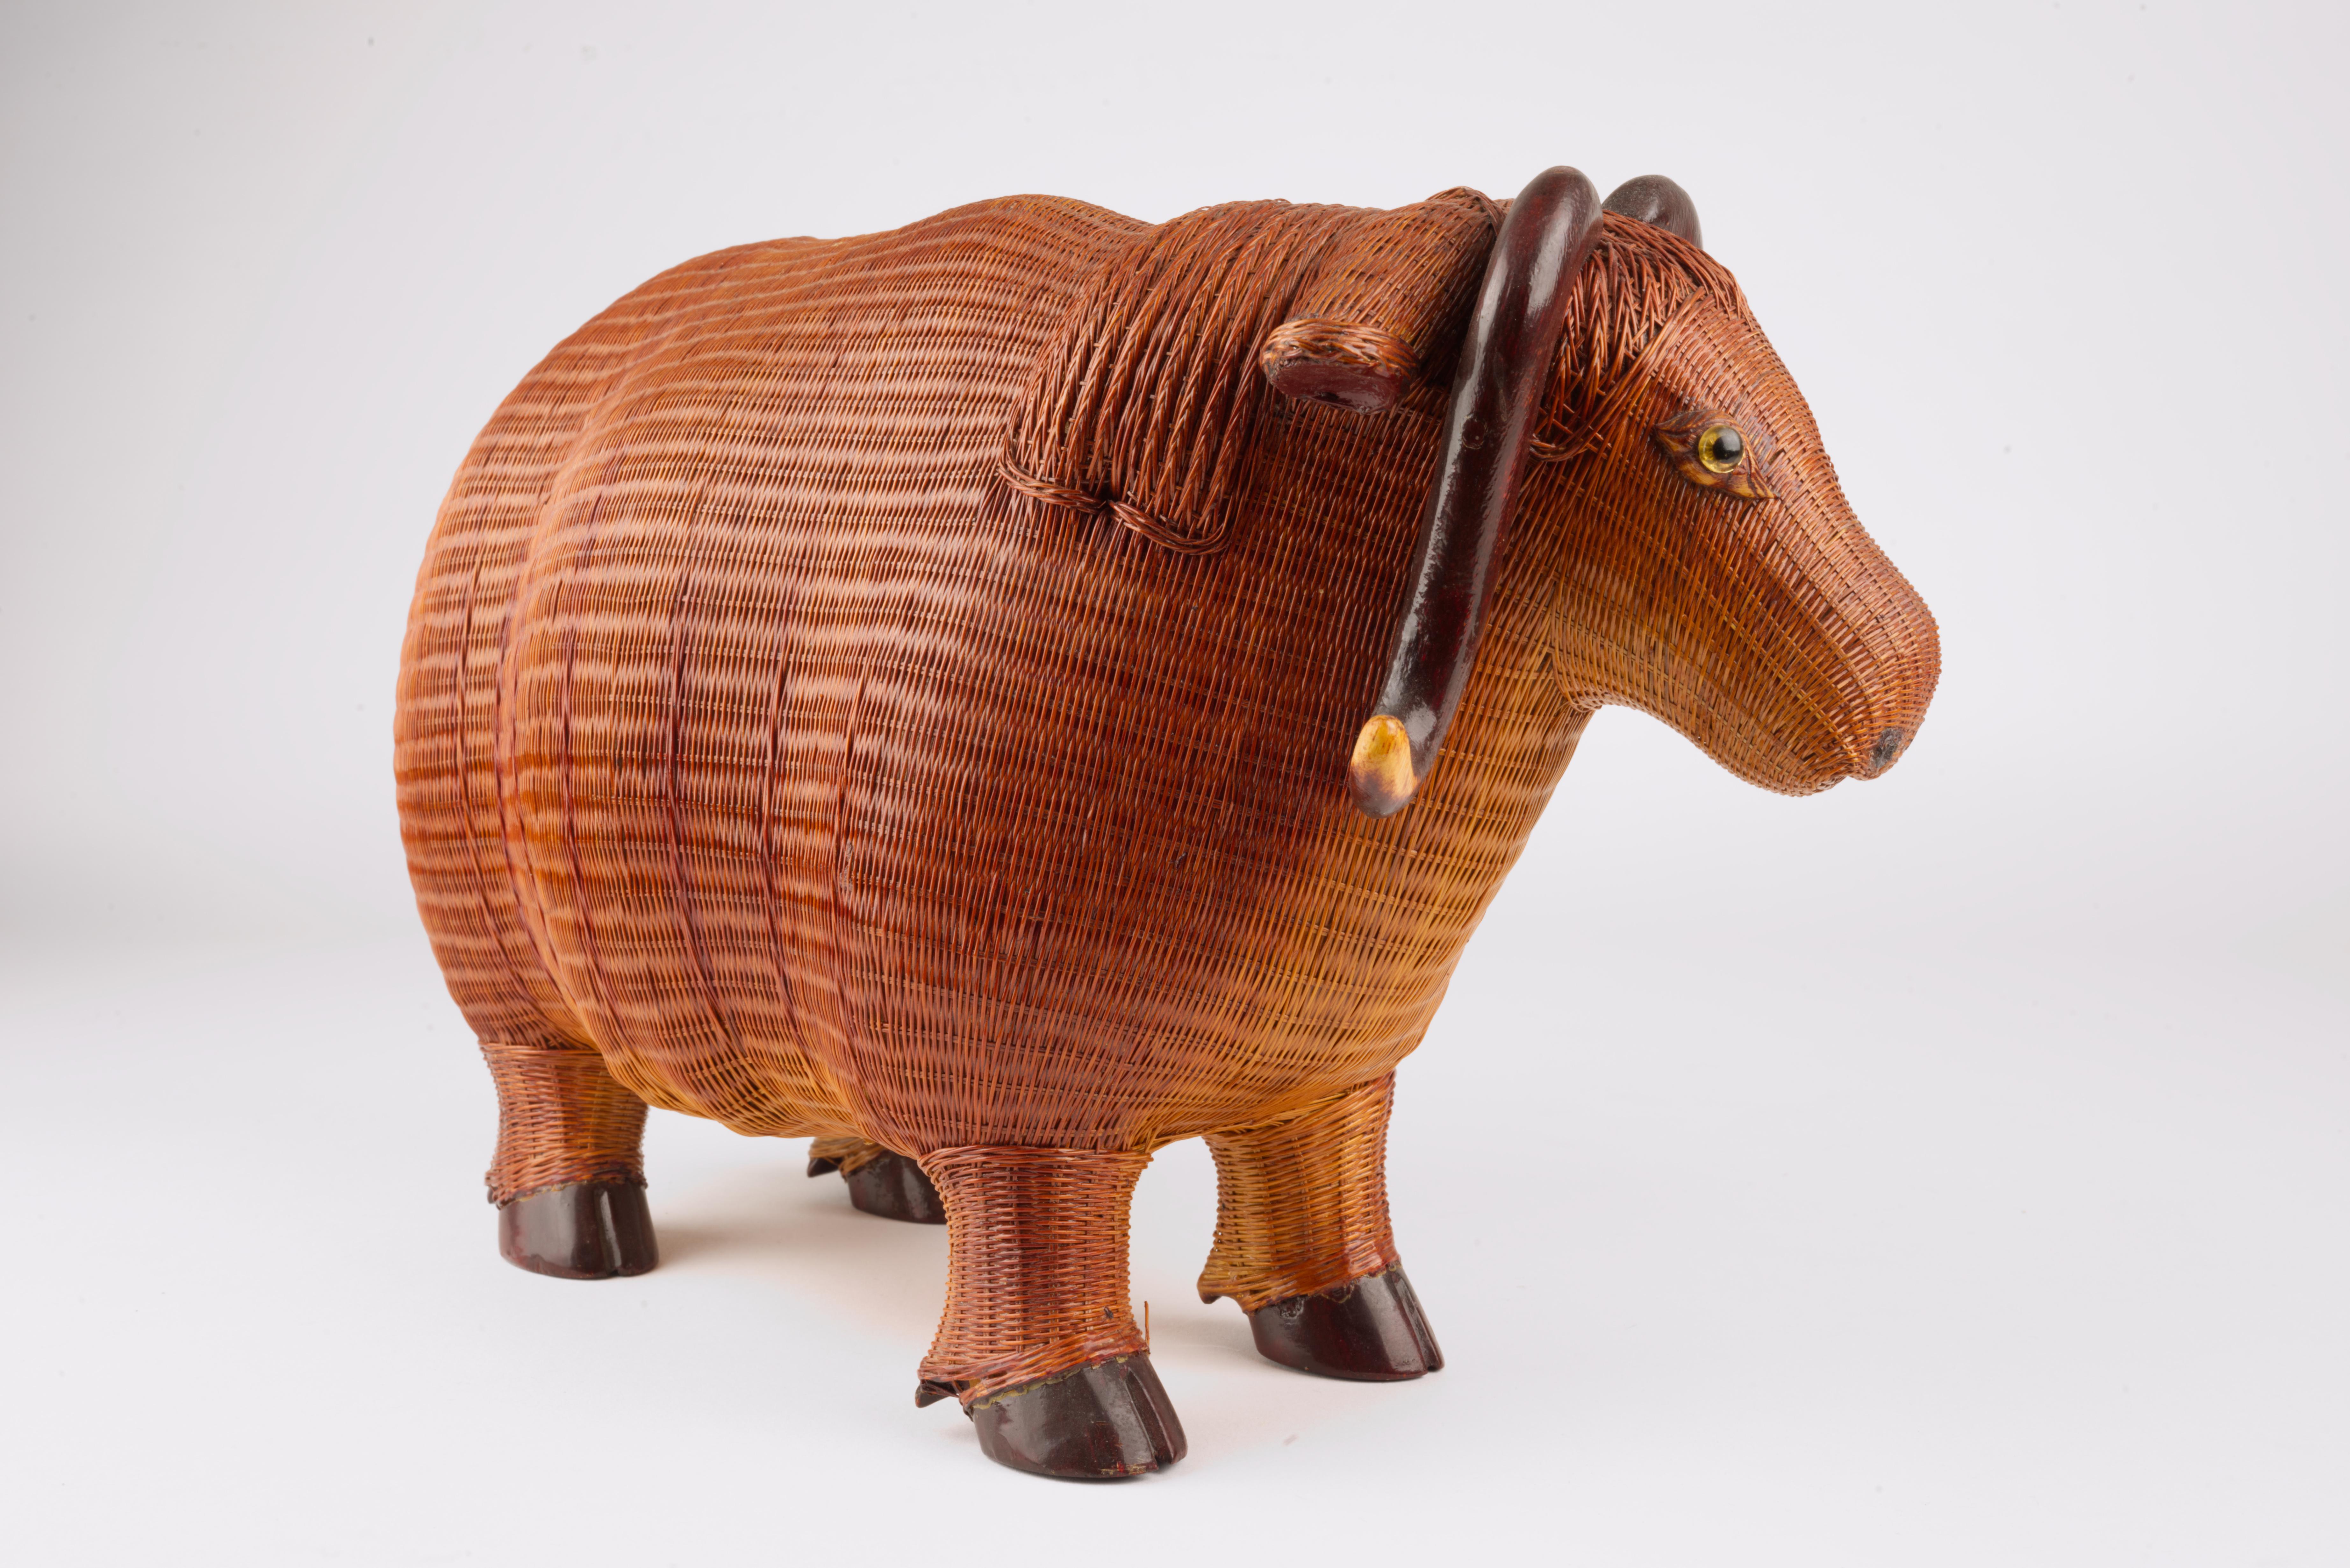 Chinese Wicker Water Buffalo Figurine by Shanghai Handicrafts For Sale